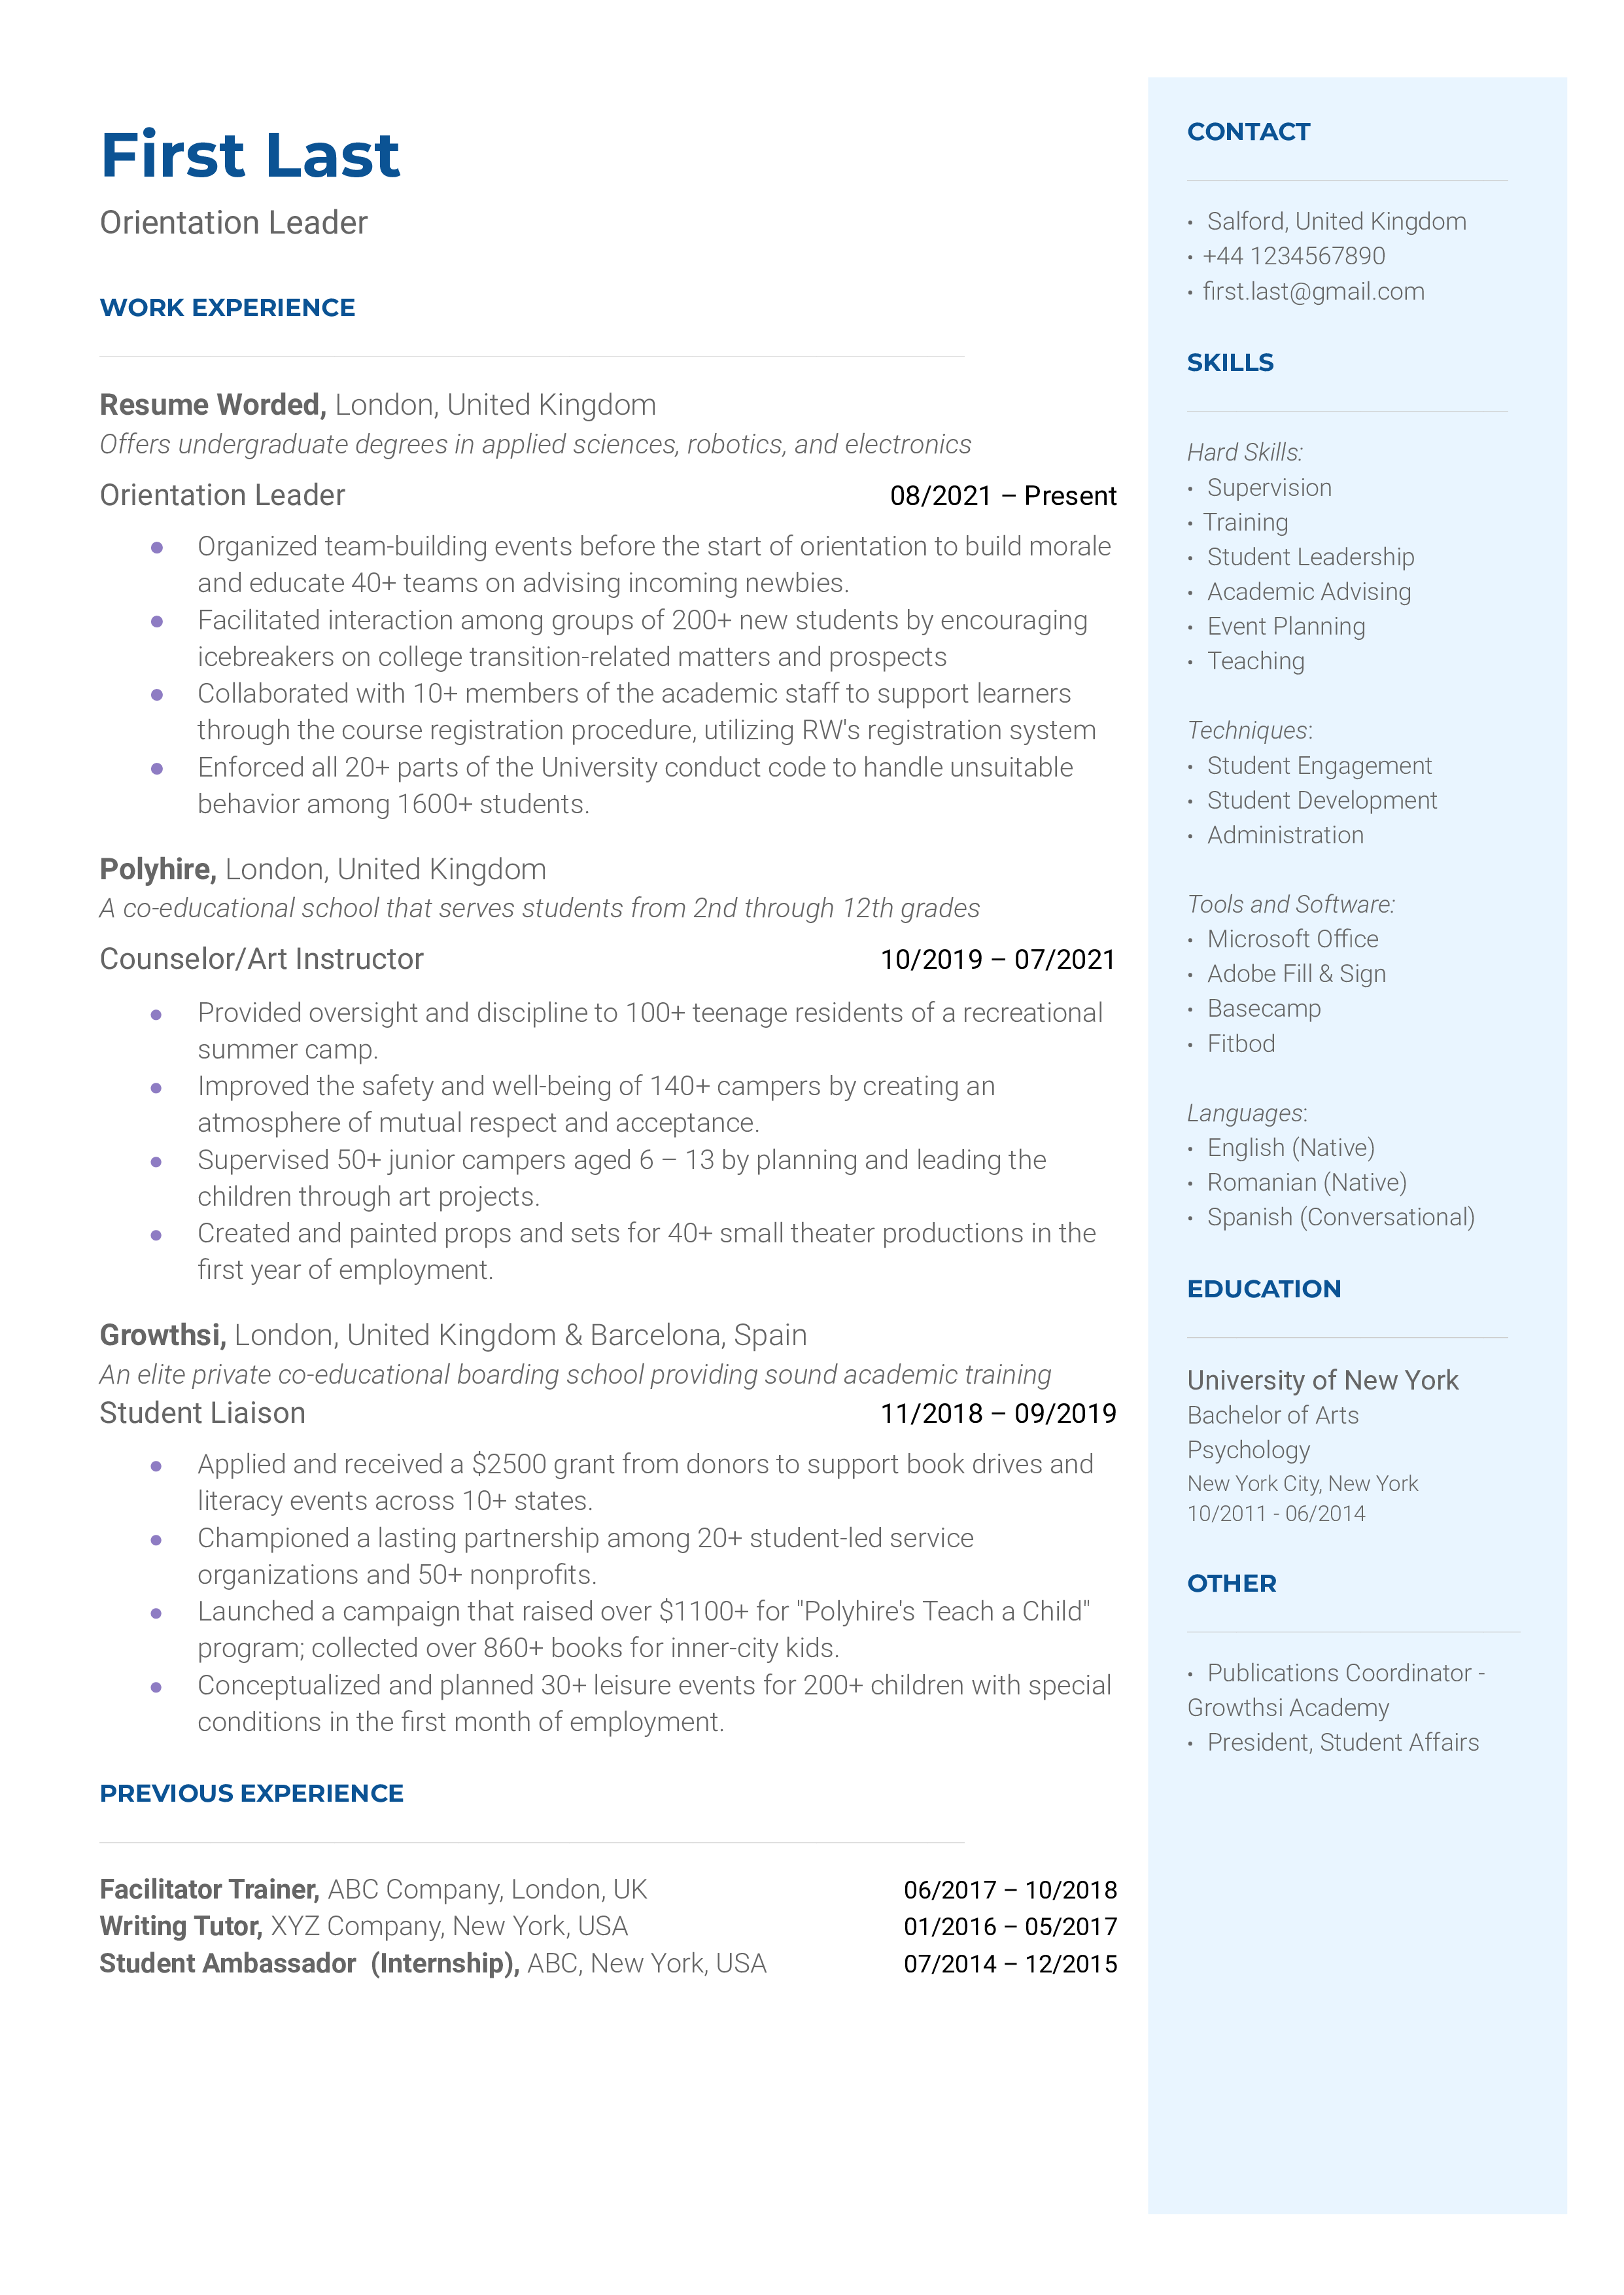 Resume showcasing experience in leading orientation programs and conducting successful onboarding experiences for new hires